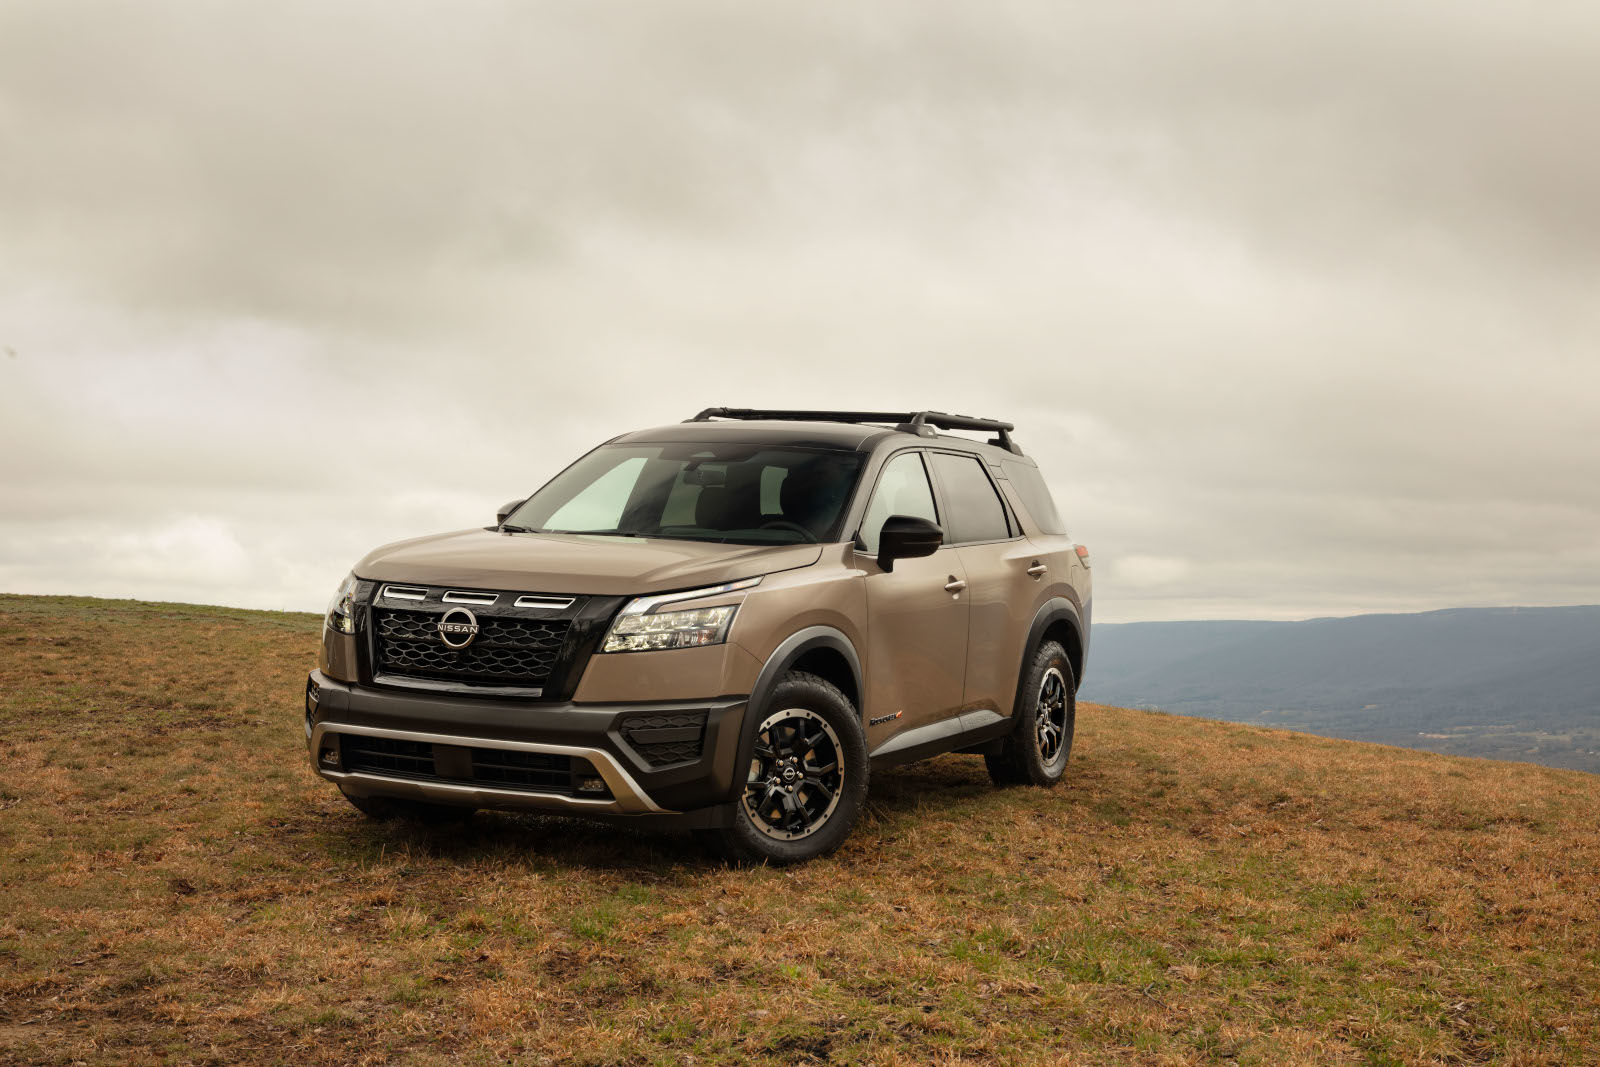 Why should you buy a 2023 Nissan Pathfinder?